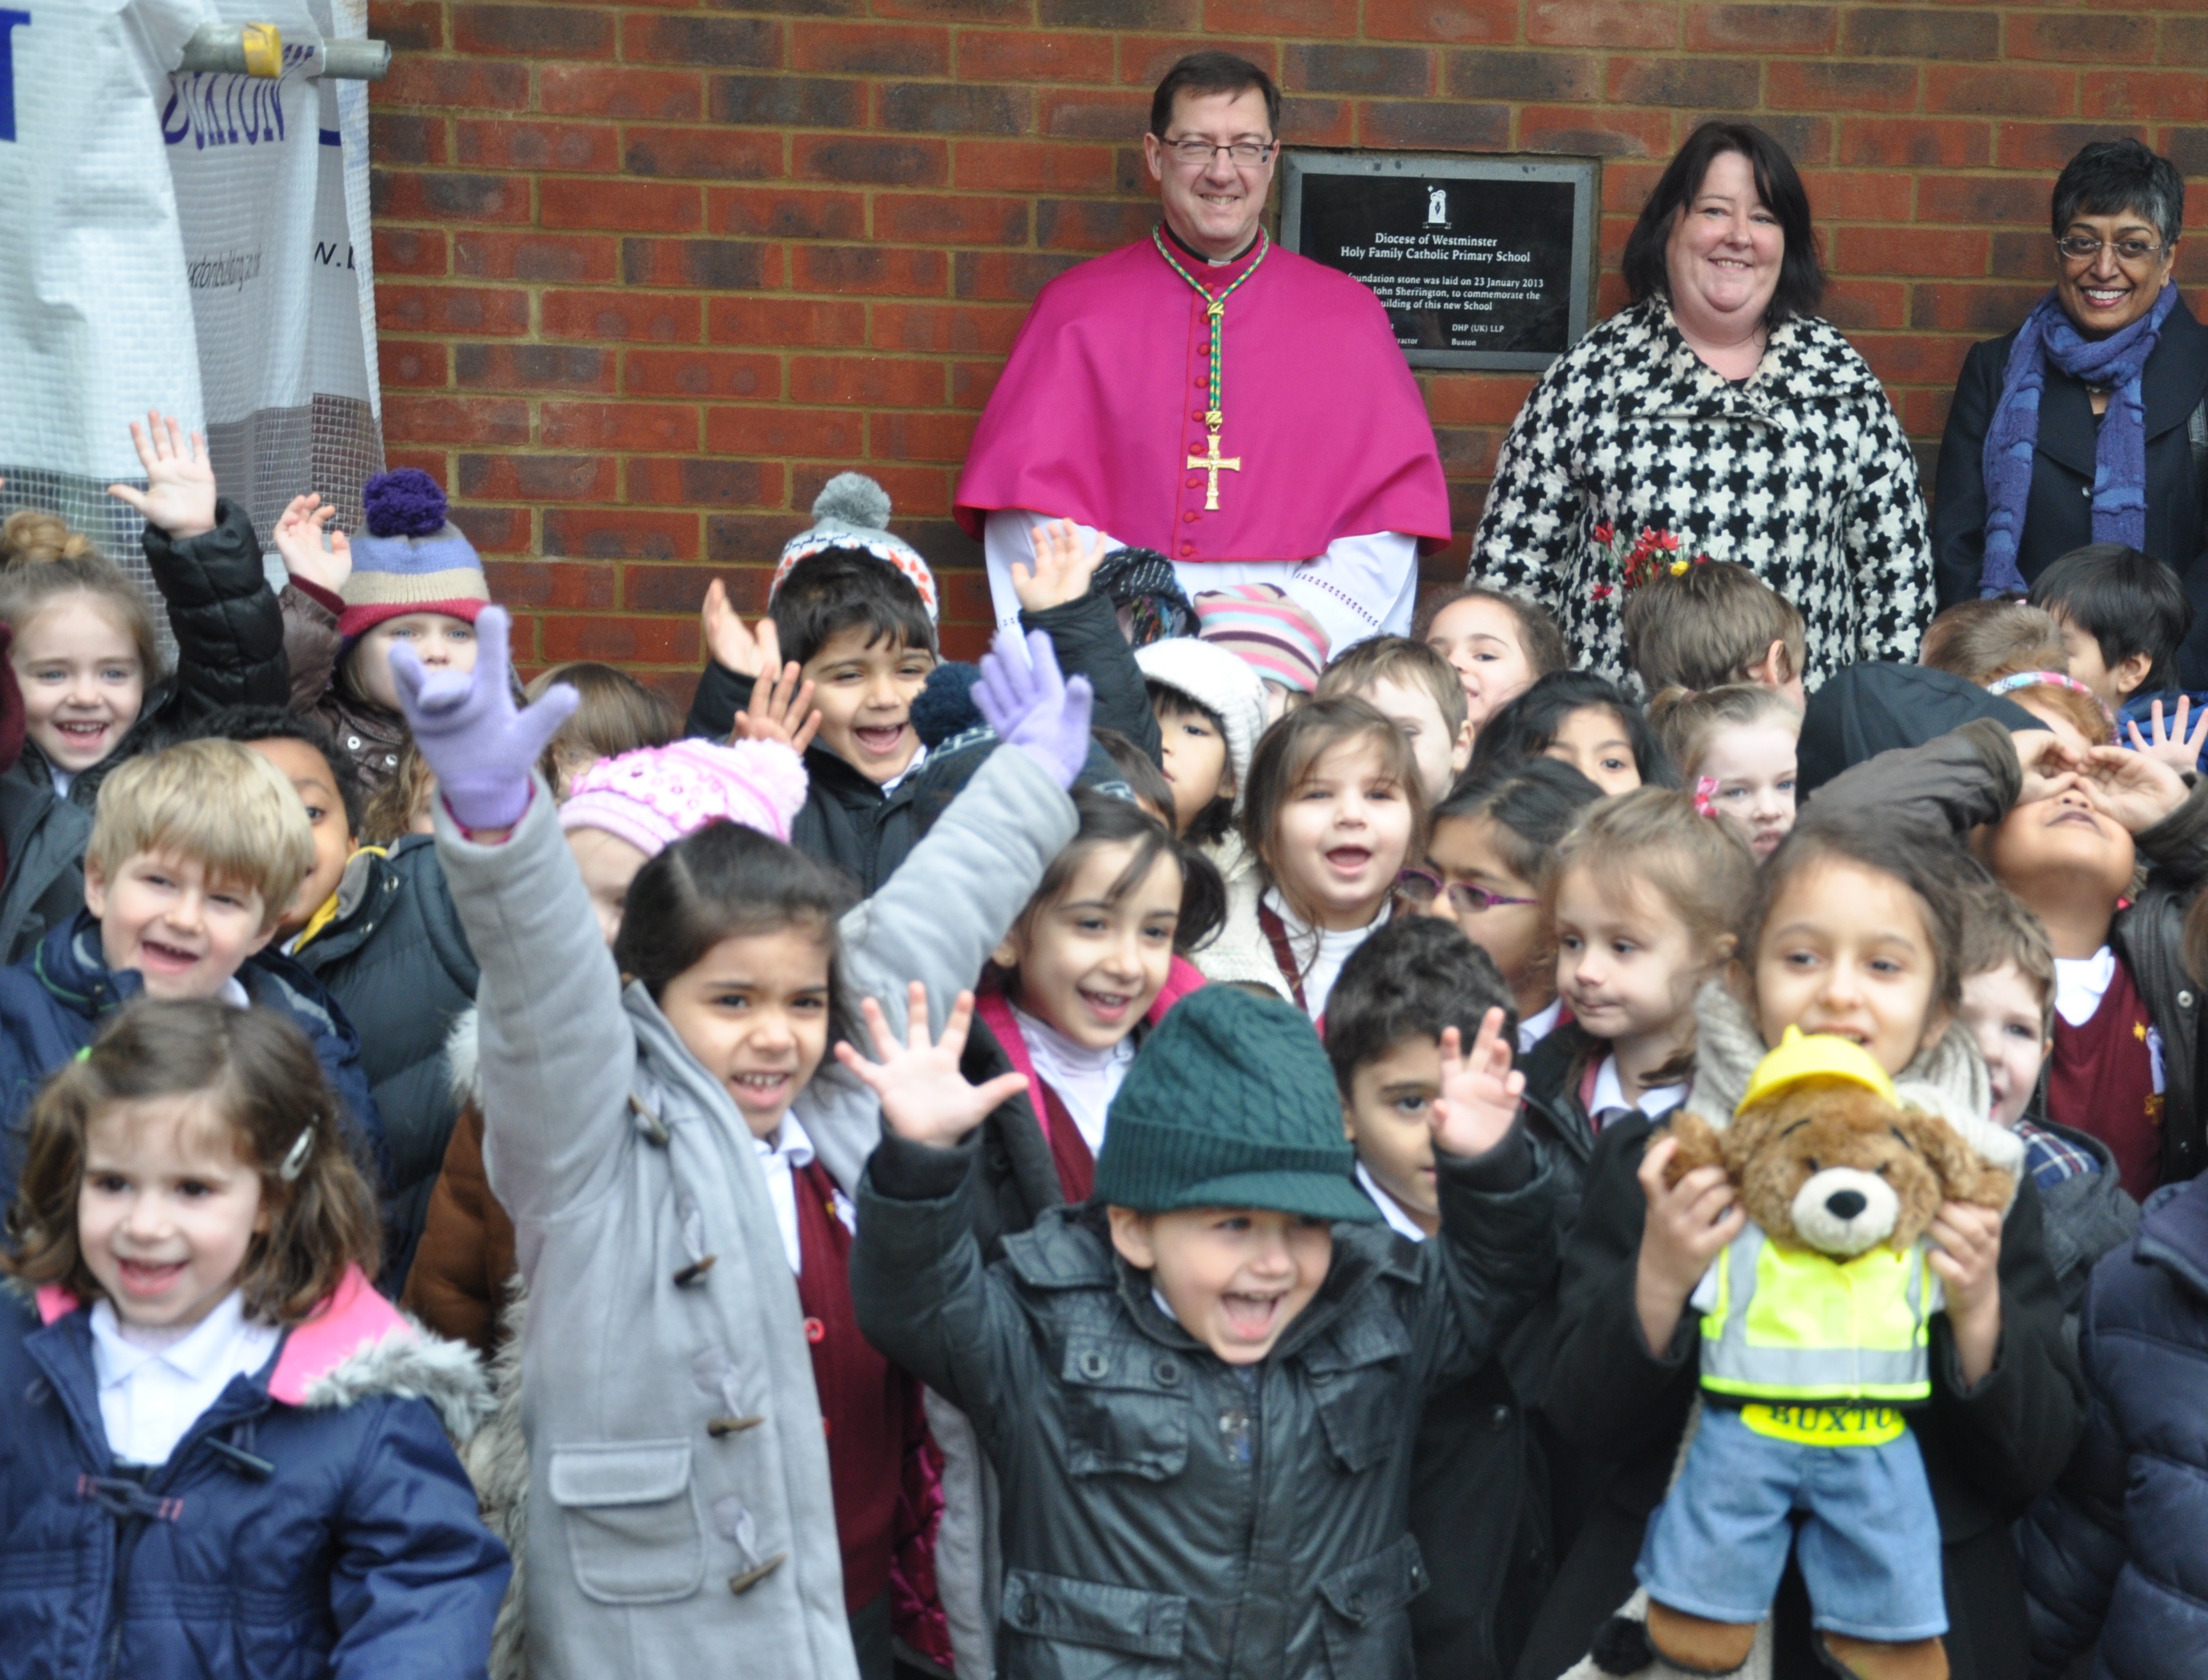 Foundation stone laid at new Catholic school in West Acton - Diocese of Westminster